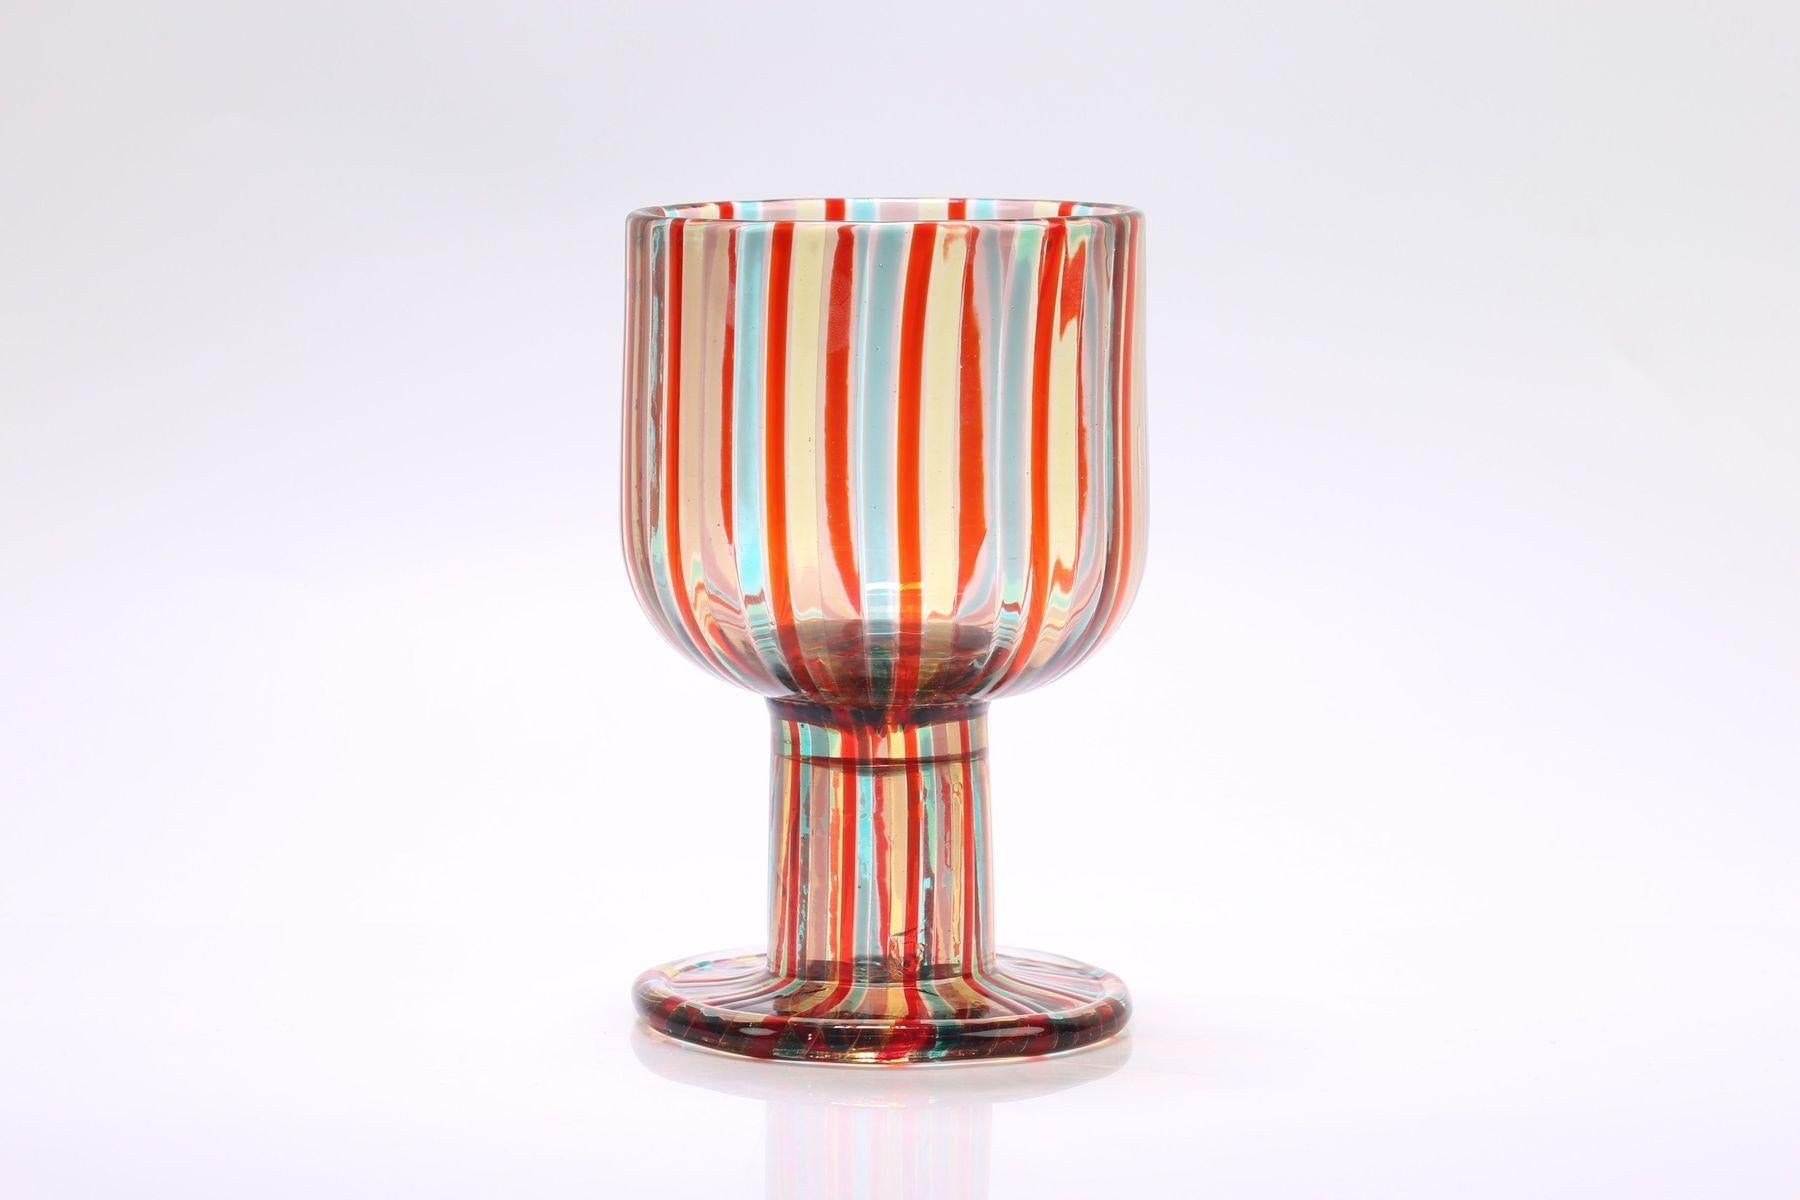 Italian Bonbon Striped Glass Dish/Bowl in red and blue from Murano, 1960s
Crafted with intricate detail, this decorative striped glass bowl is perfect for presenting bonbons or snacks in style. Originating from the artistic hub of Murano, Italy,